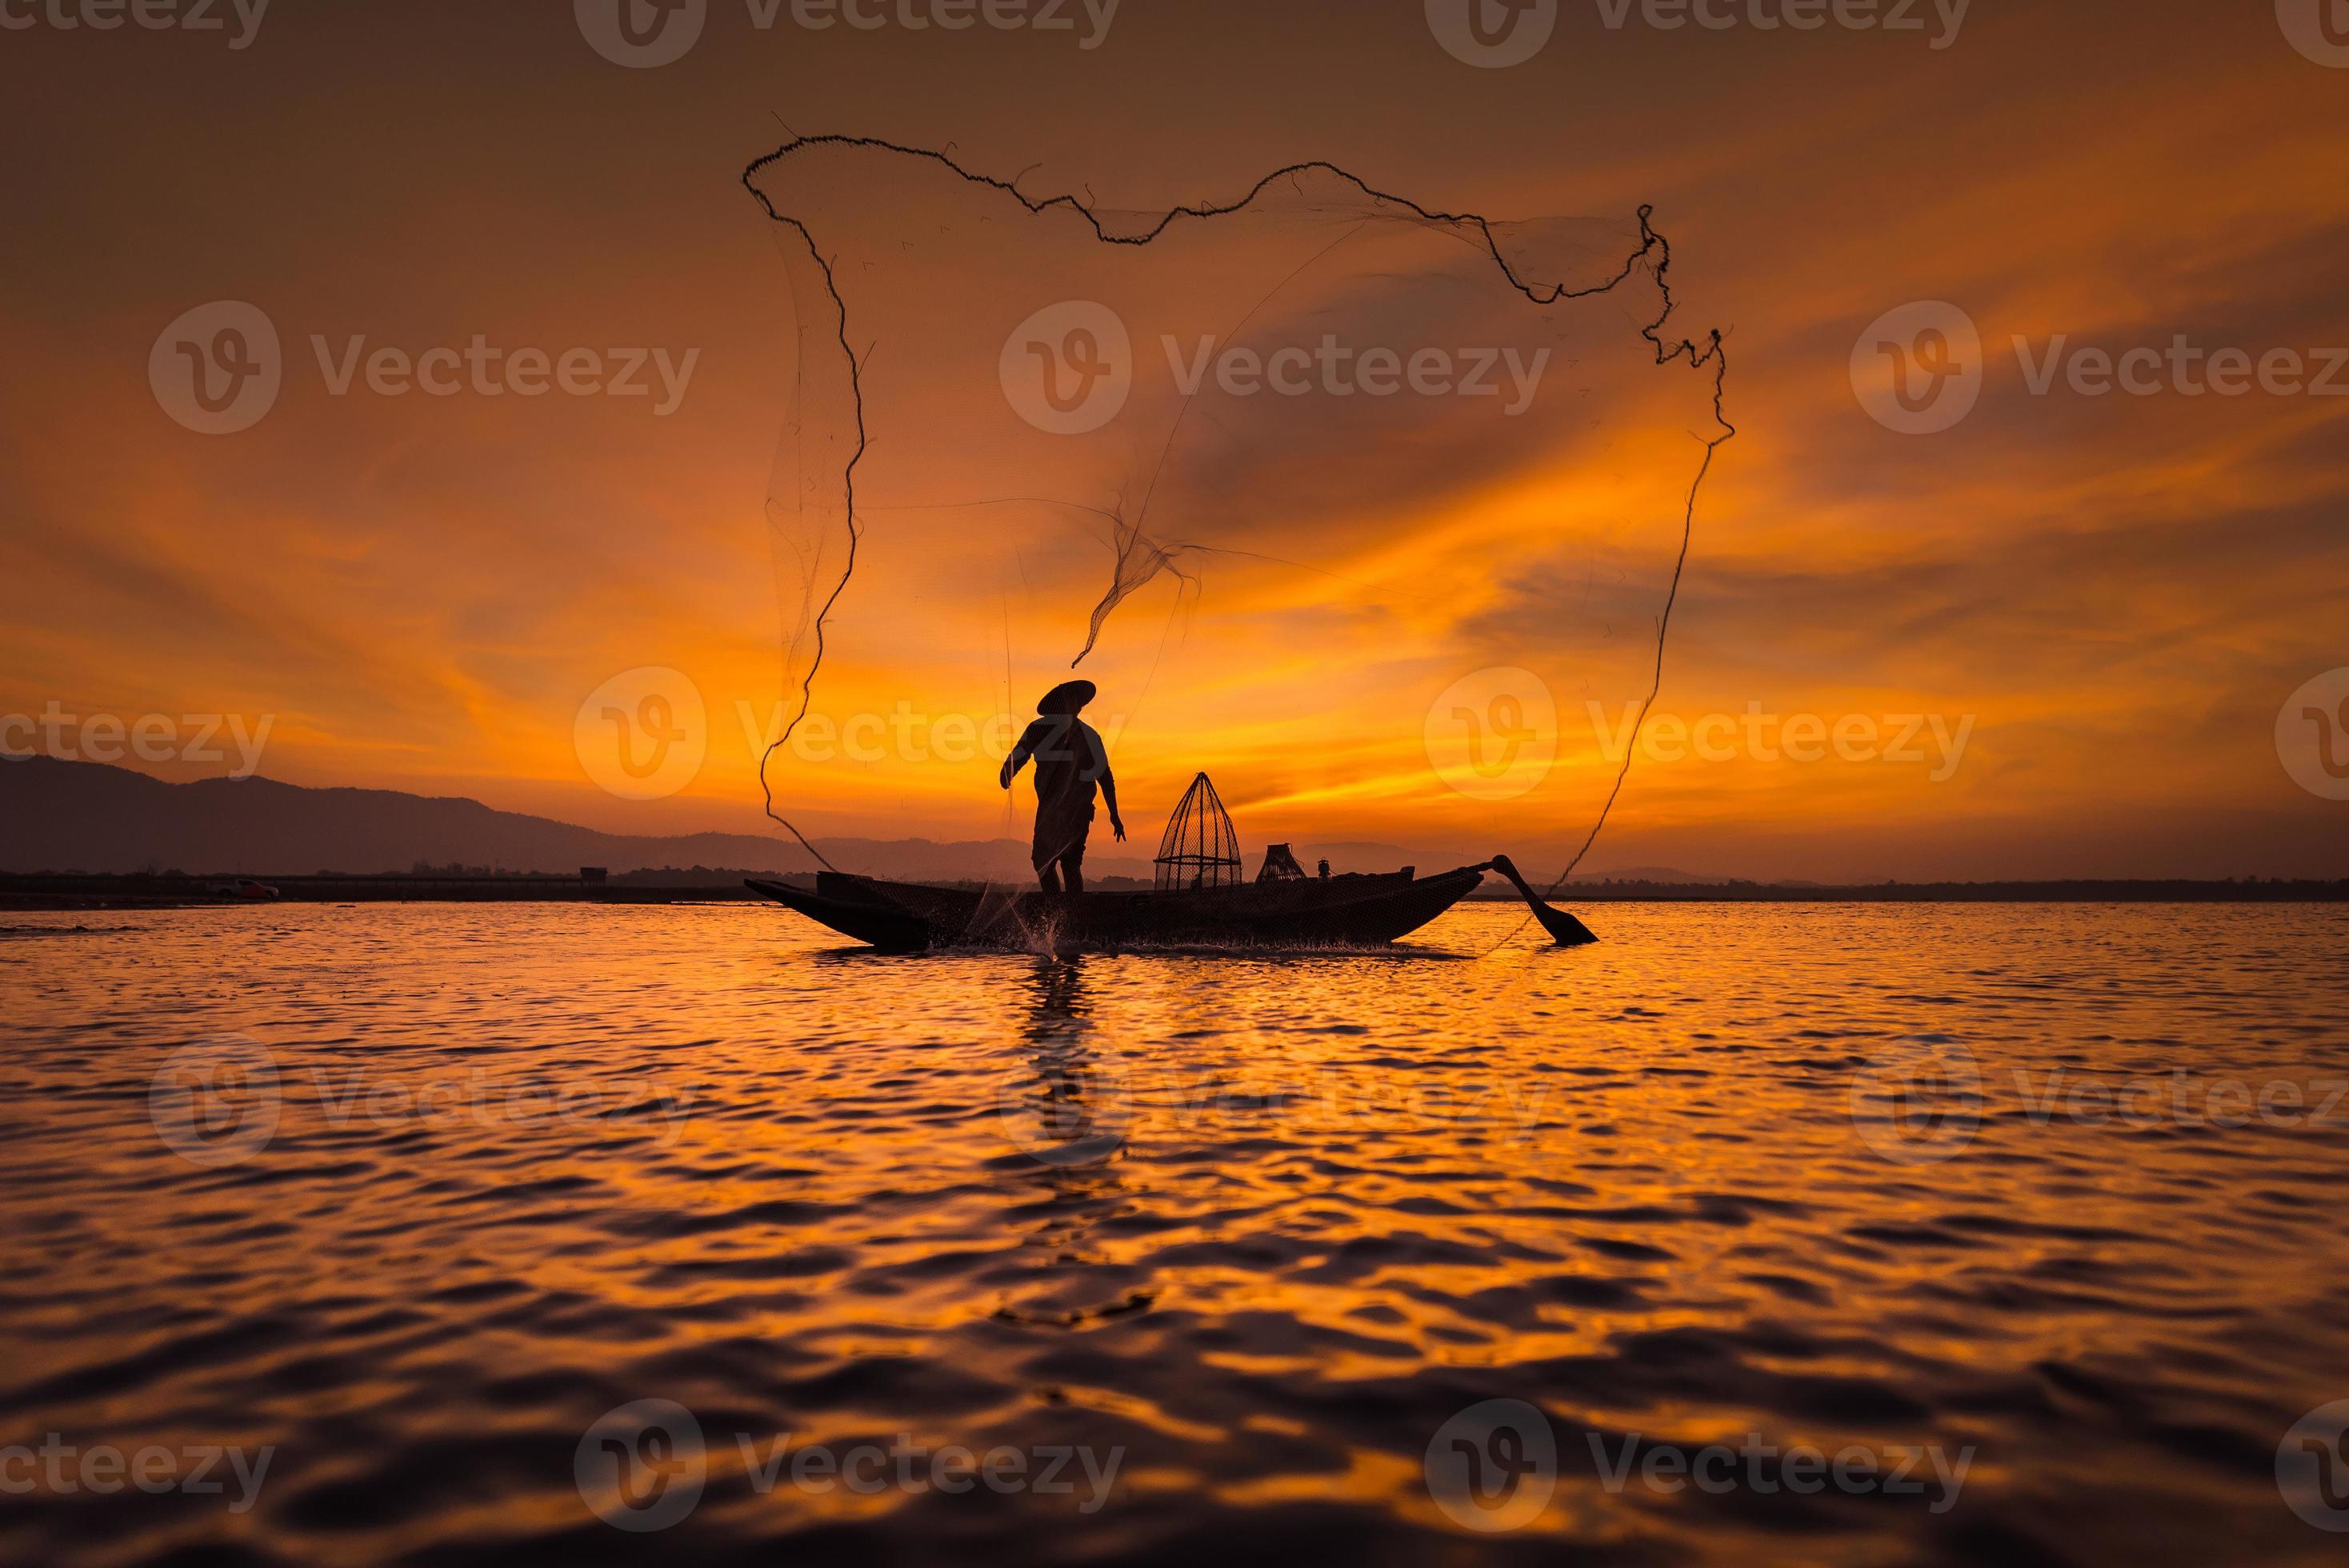 https://static.vecteezy.com/system/resources/previews/004/953/798/large_2x/asian-fisherman-on-wooden-boat-casting-a-net-for-catching-freshwater-fish-in-nature-river-in-the-early-morning-before-sunrise-photo.jpg